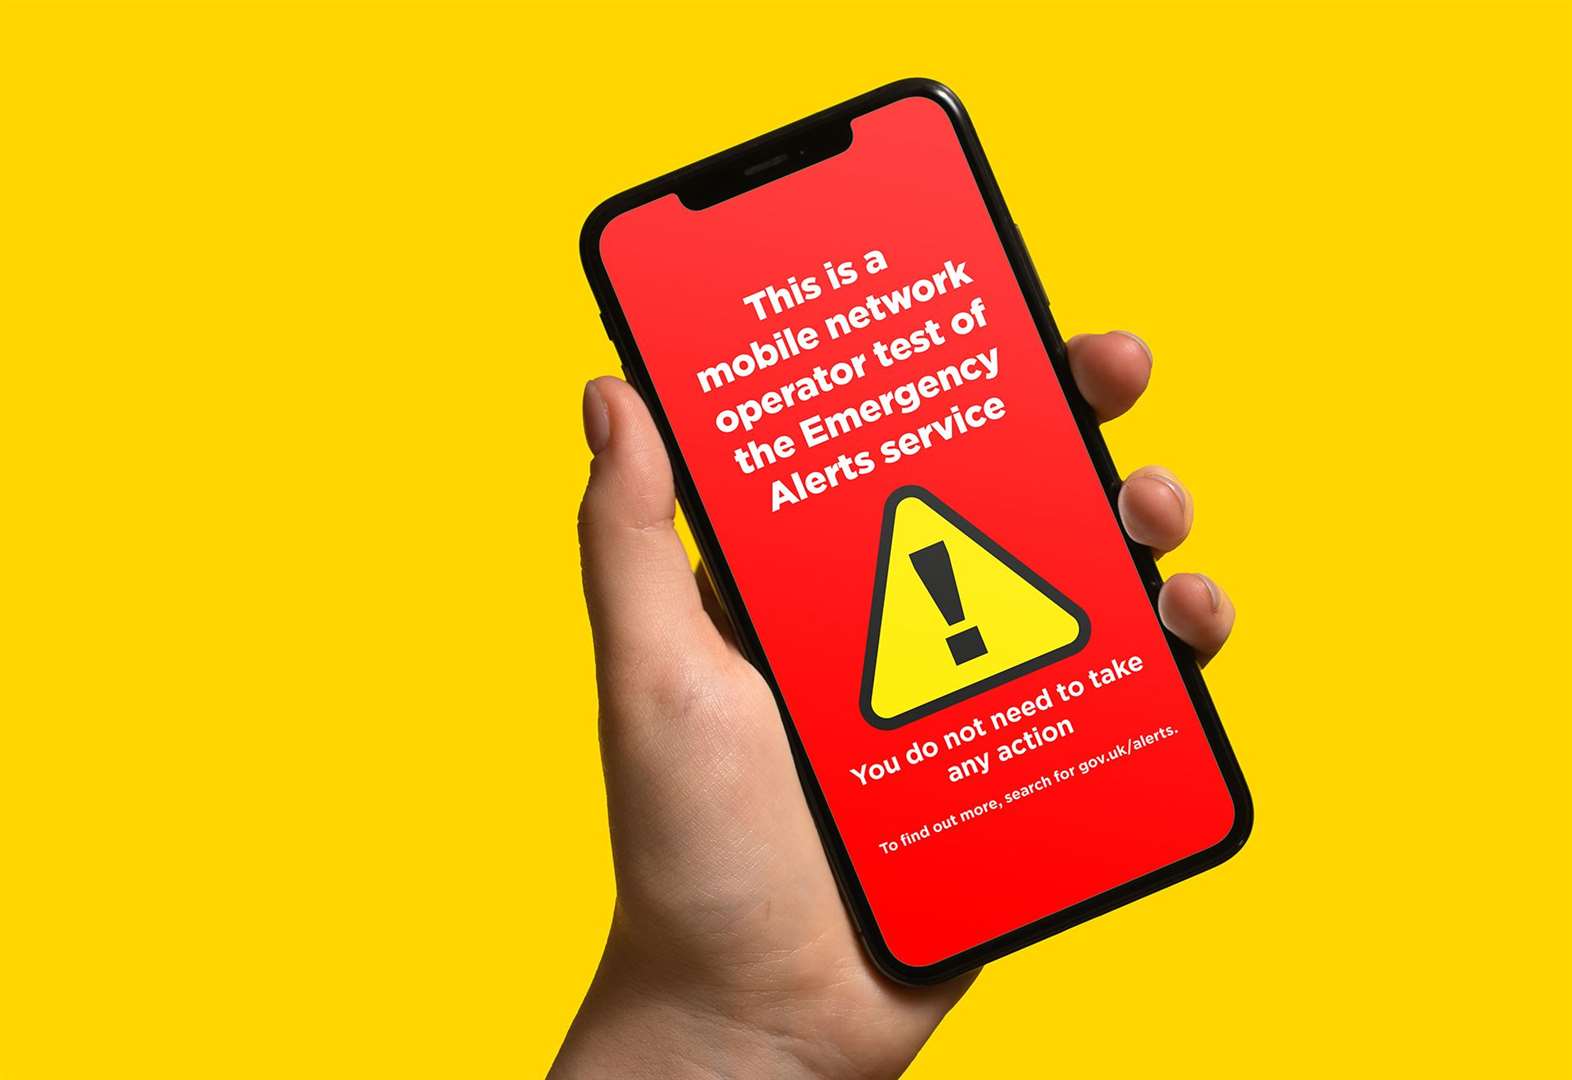 The Emergency Alerts system is due for a national test on April 23 at a time chosen to limit the impact on major events taking place that day.